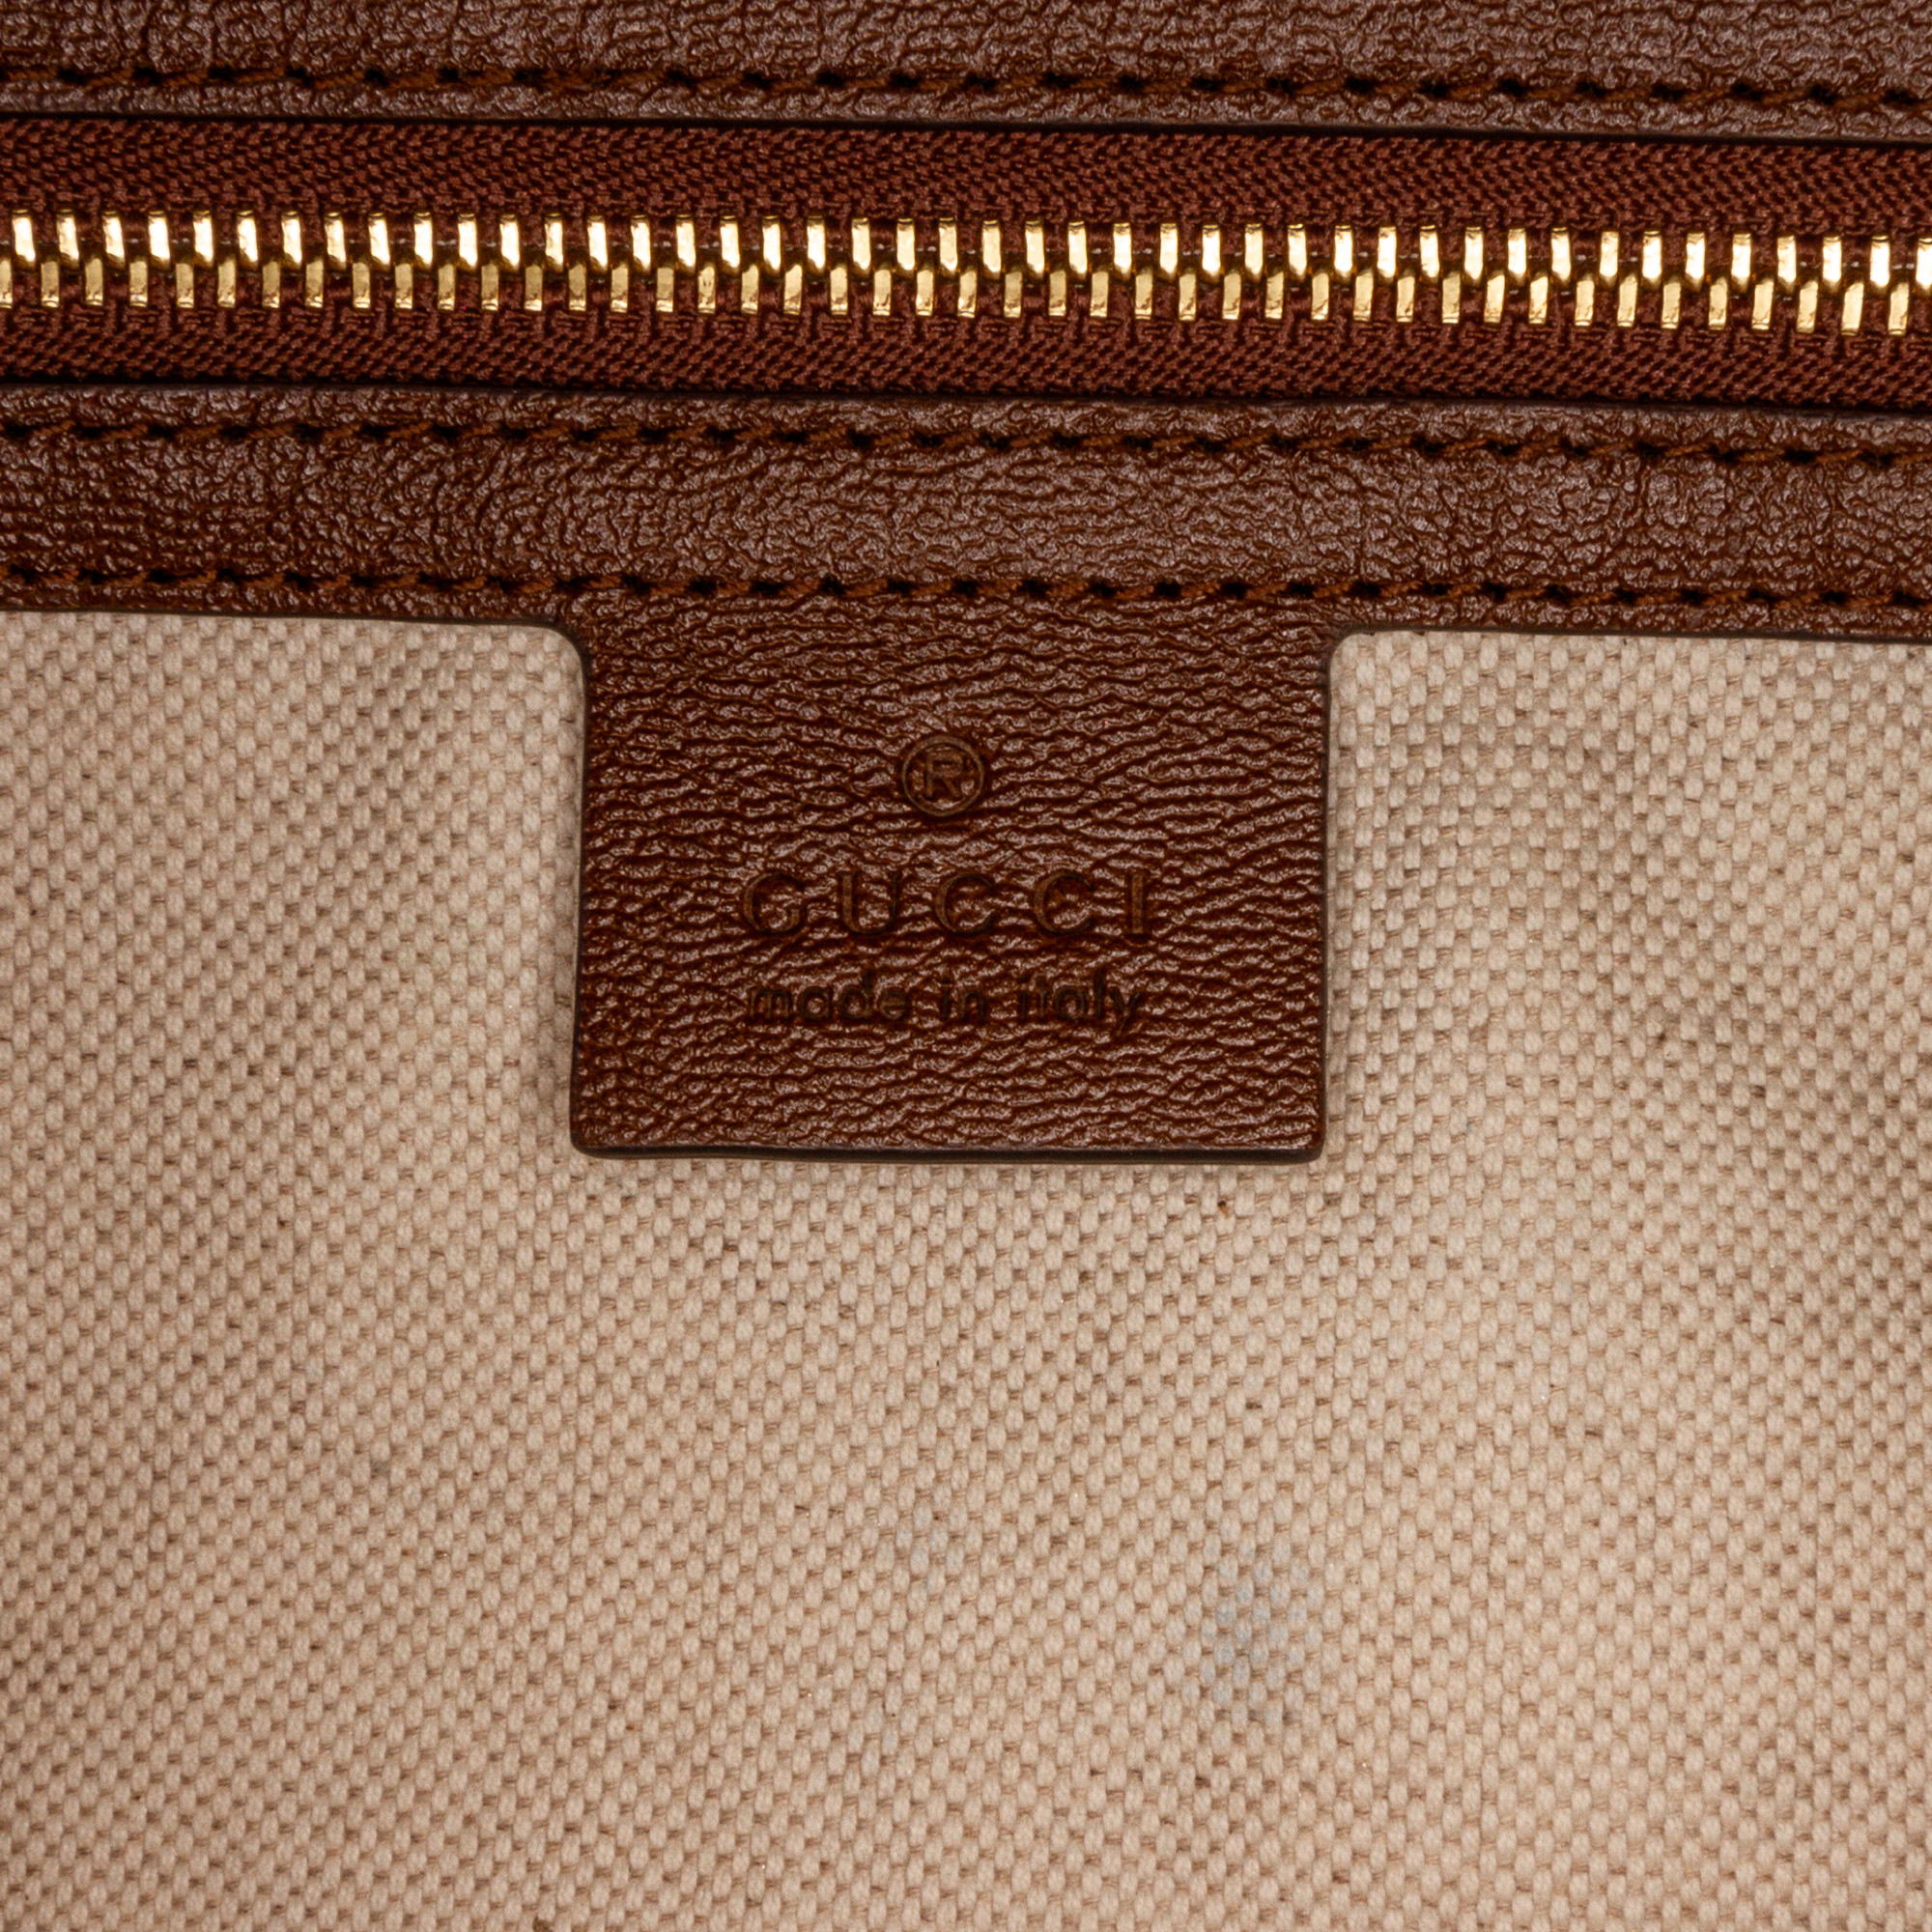 Gucci Brown Large GG Canvas 1955 Horsebit Chain Tote